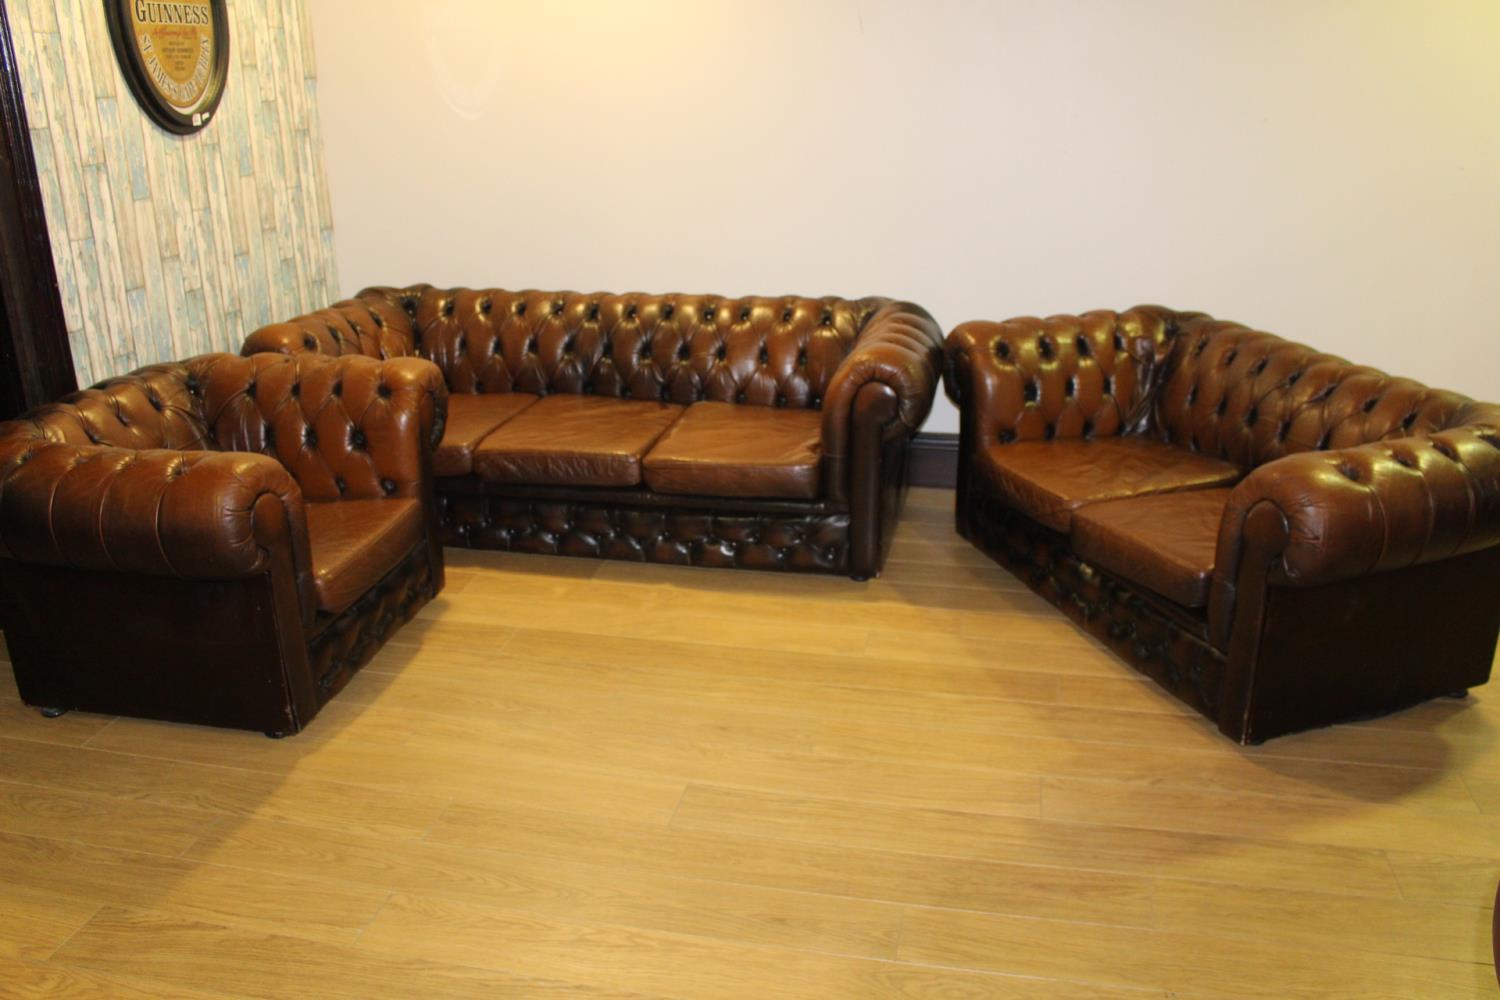 Excellent quality leather chesterfield three piece deep buttoned upholstered suite